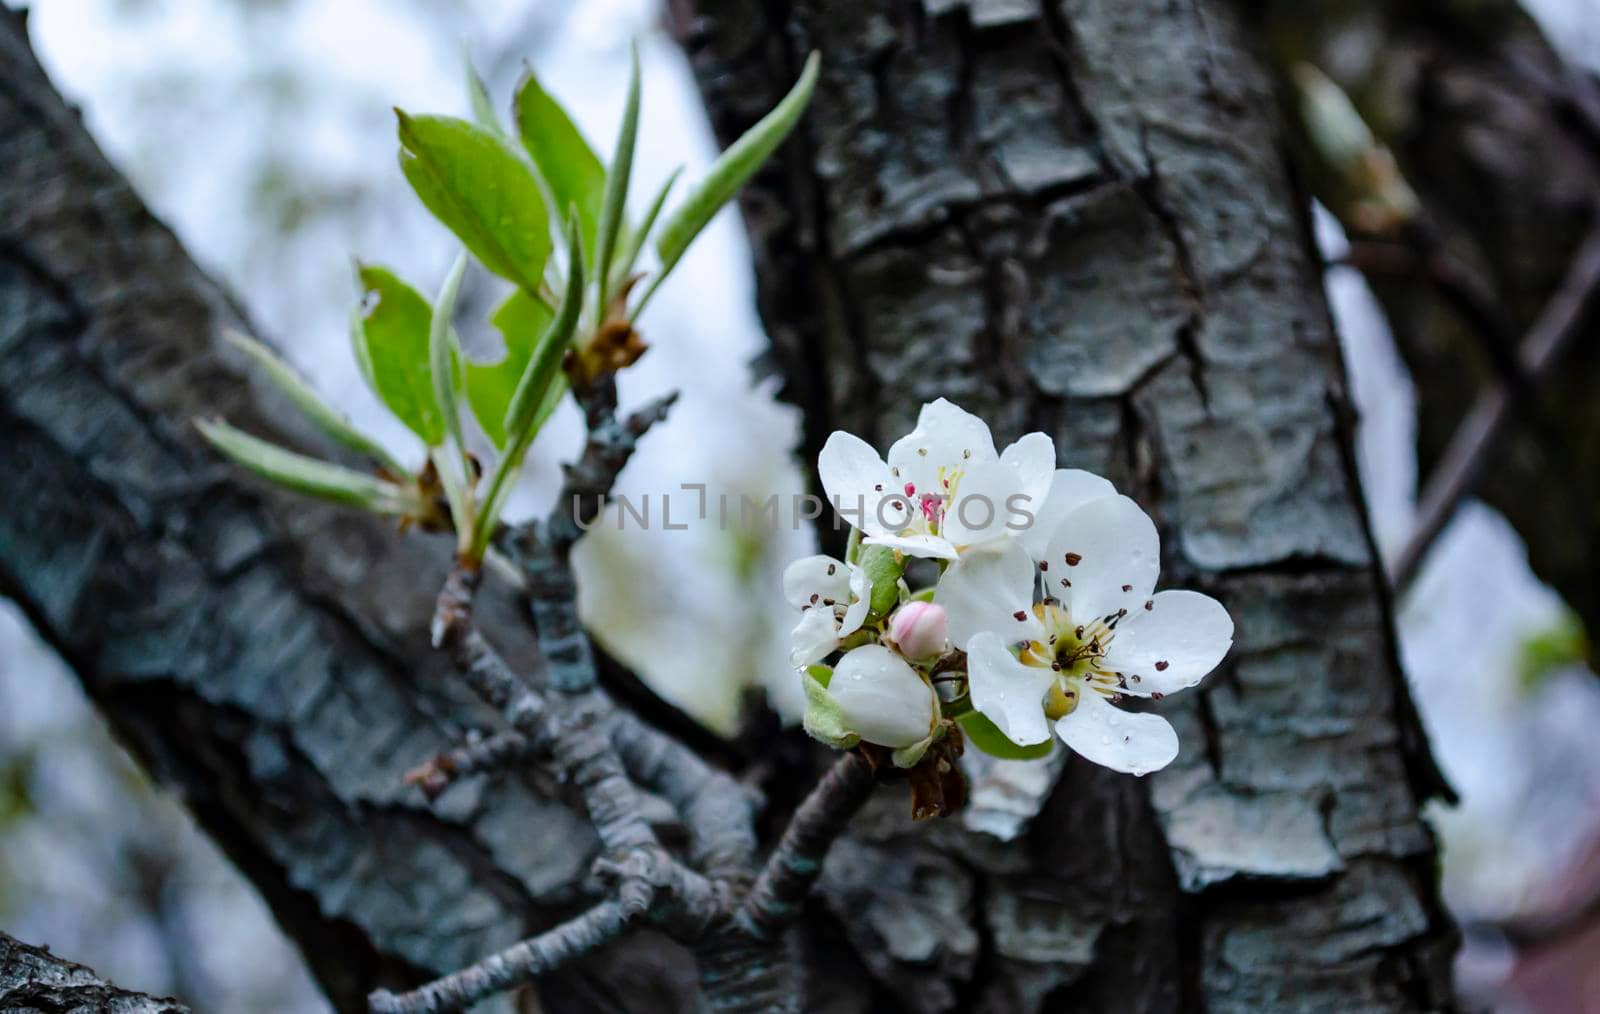 Flowering apple tree with raindrops .Fresh spring background on nature outdoors.Soft focus image of blooming flowers in springtime.For agricultural concepts by mtx